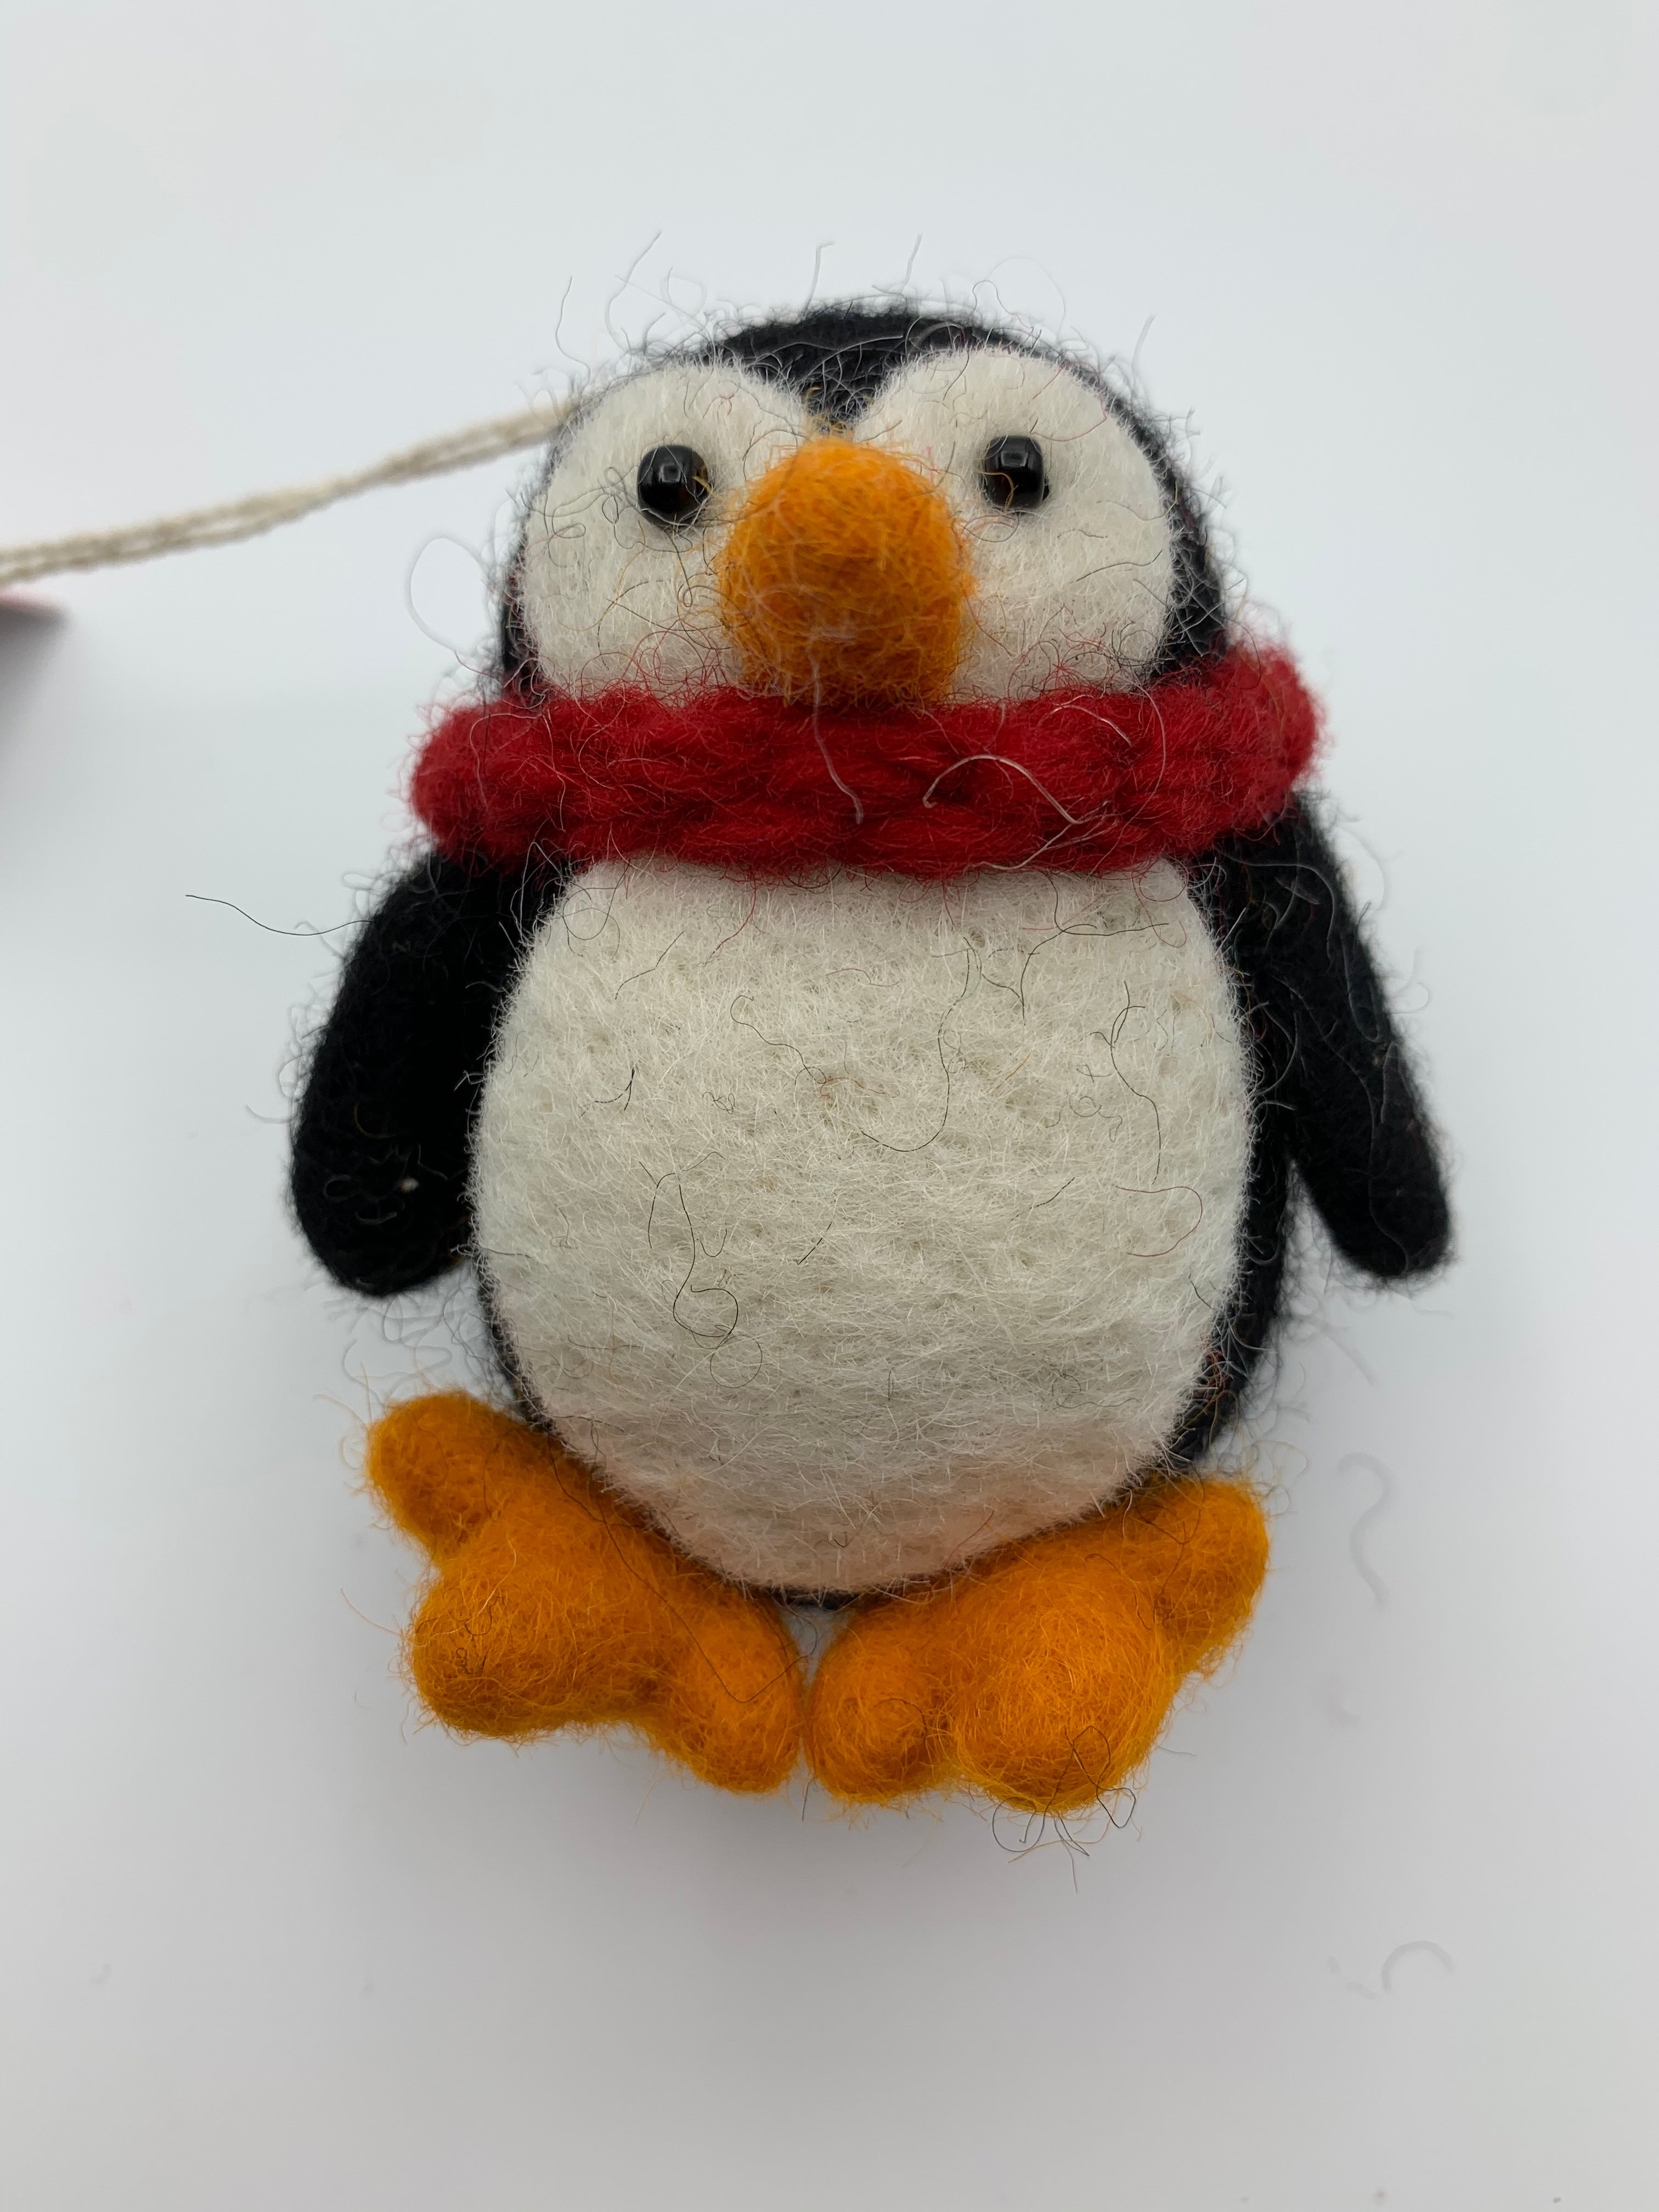 This a close-up view of the Pokey penguin Christmas ornament. It is handcrafted (fair trade), made of 100% hand-felted natural wool, is black and white and a little chubby, with an orange beak and feet, wearing a red winter scarf. Approximately 3.5"x3". He comes with a detachable fair trade holiday tag to use if you are giving this as a gift.